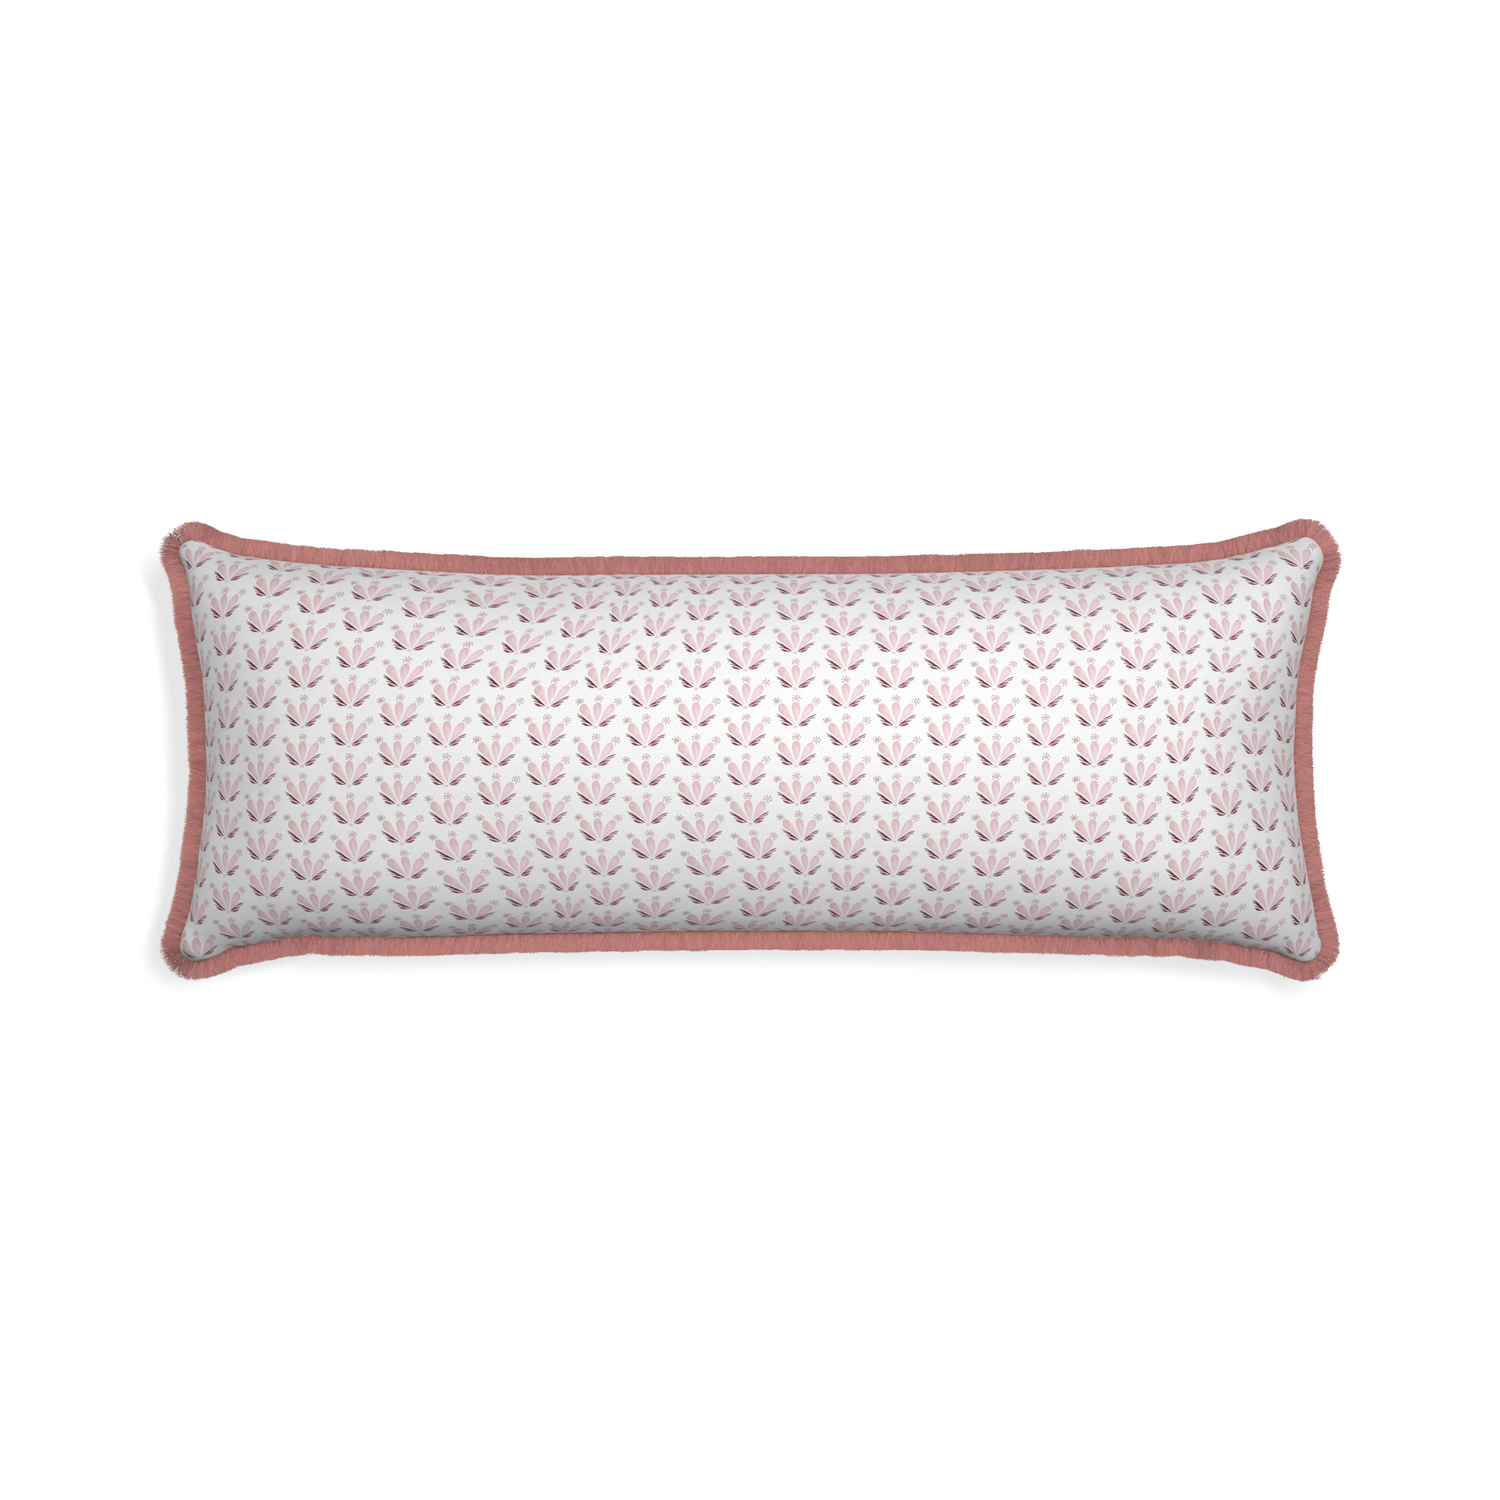 Xl-lumbar serena pink custom pillow with d fringe on white background